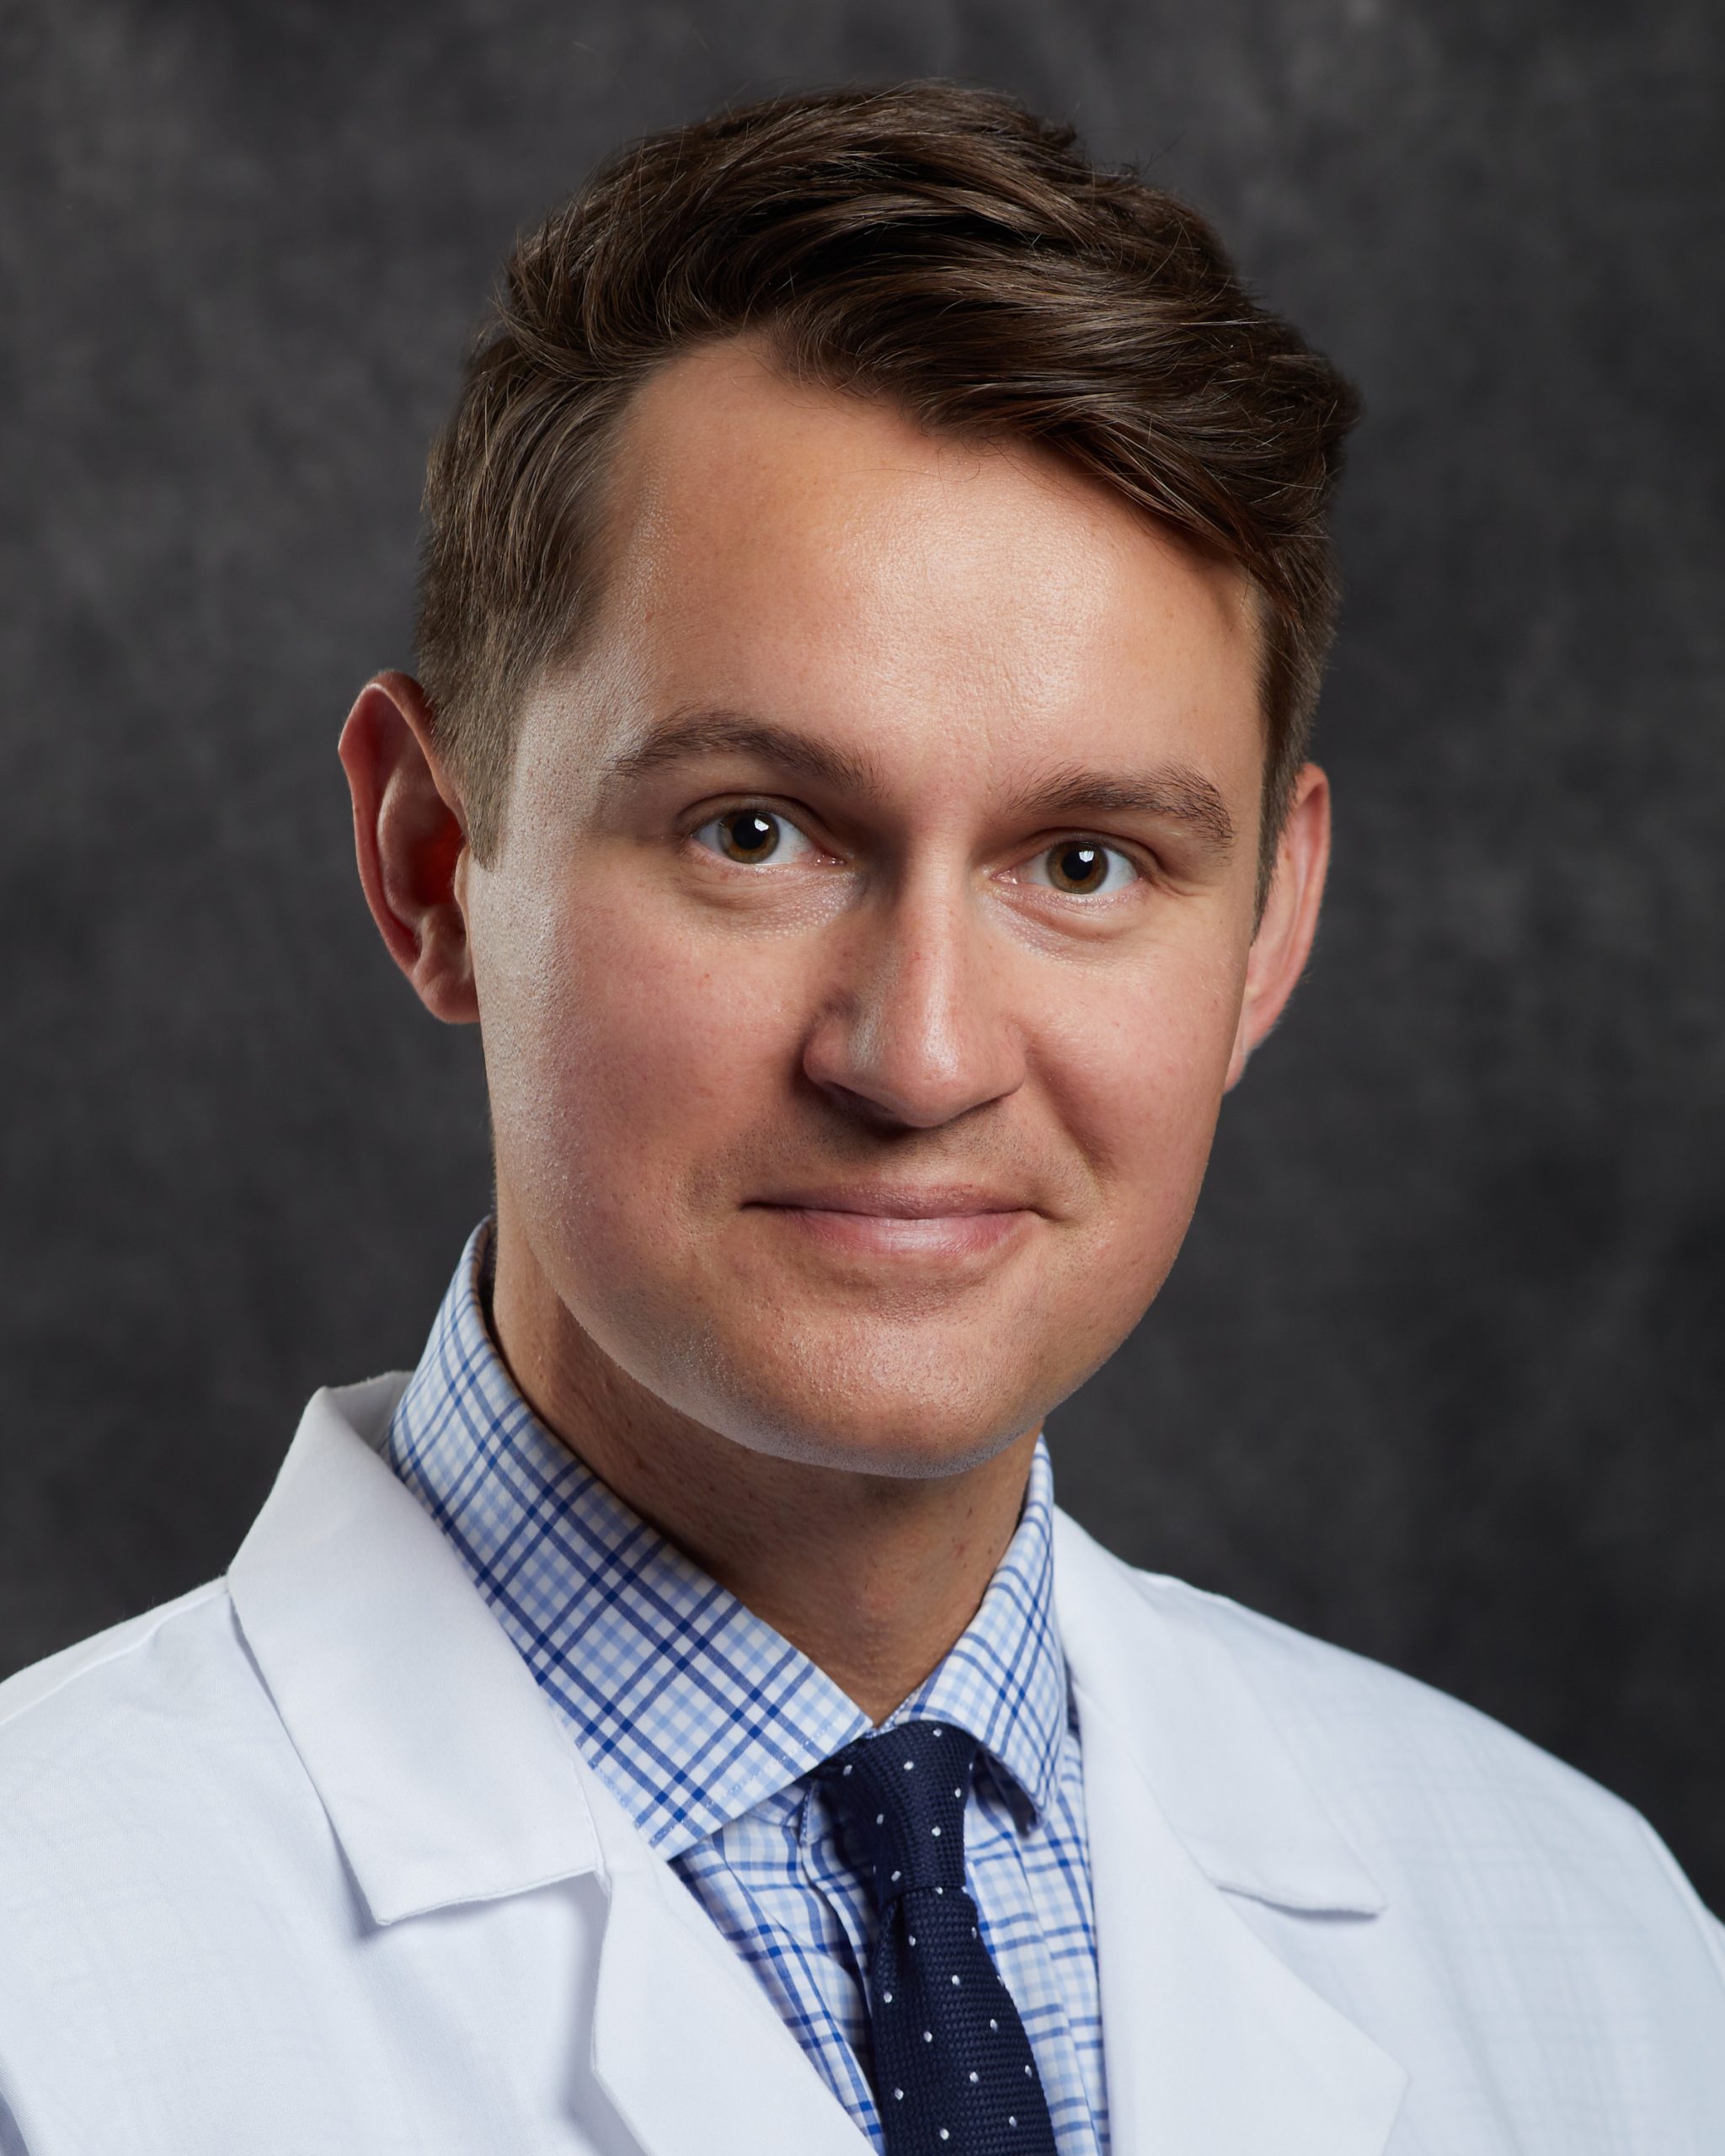 Michael Tuczynski, MD - An Employed Provider of Memorial Healthcare